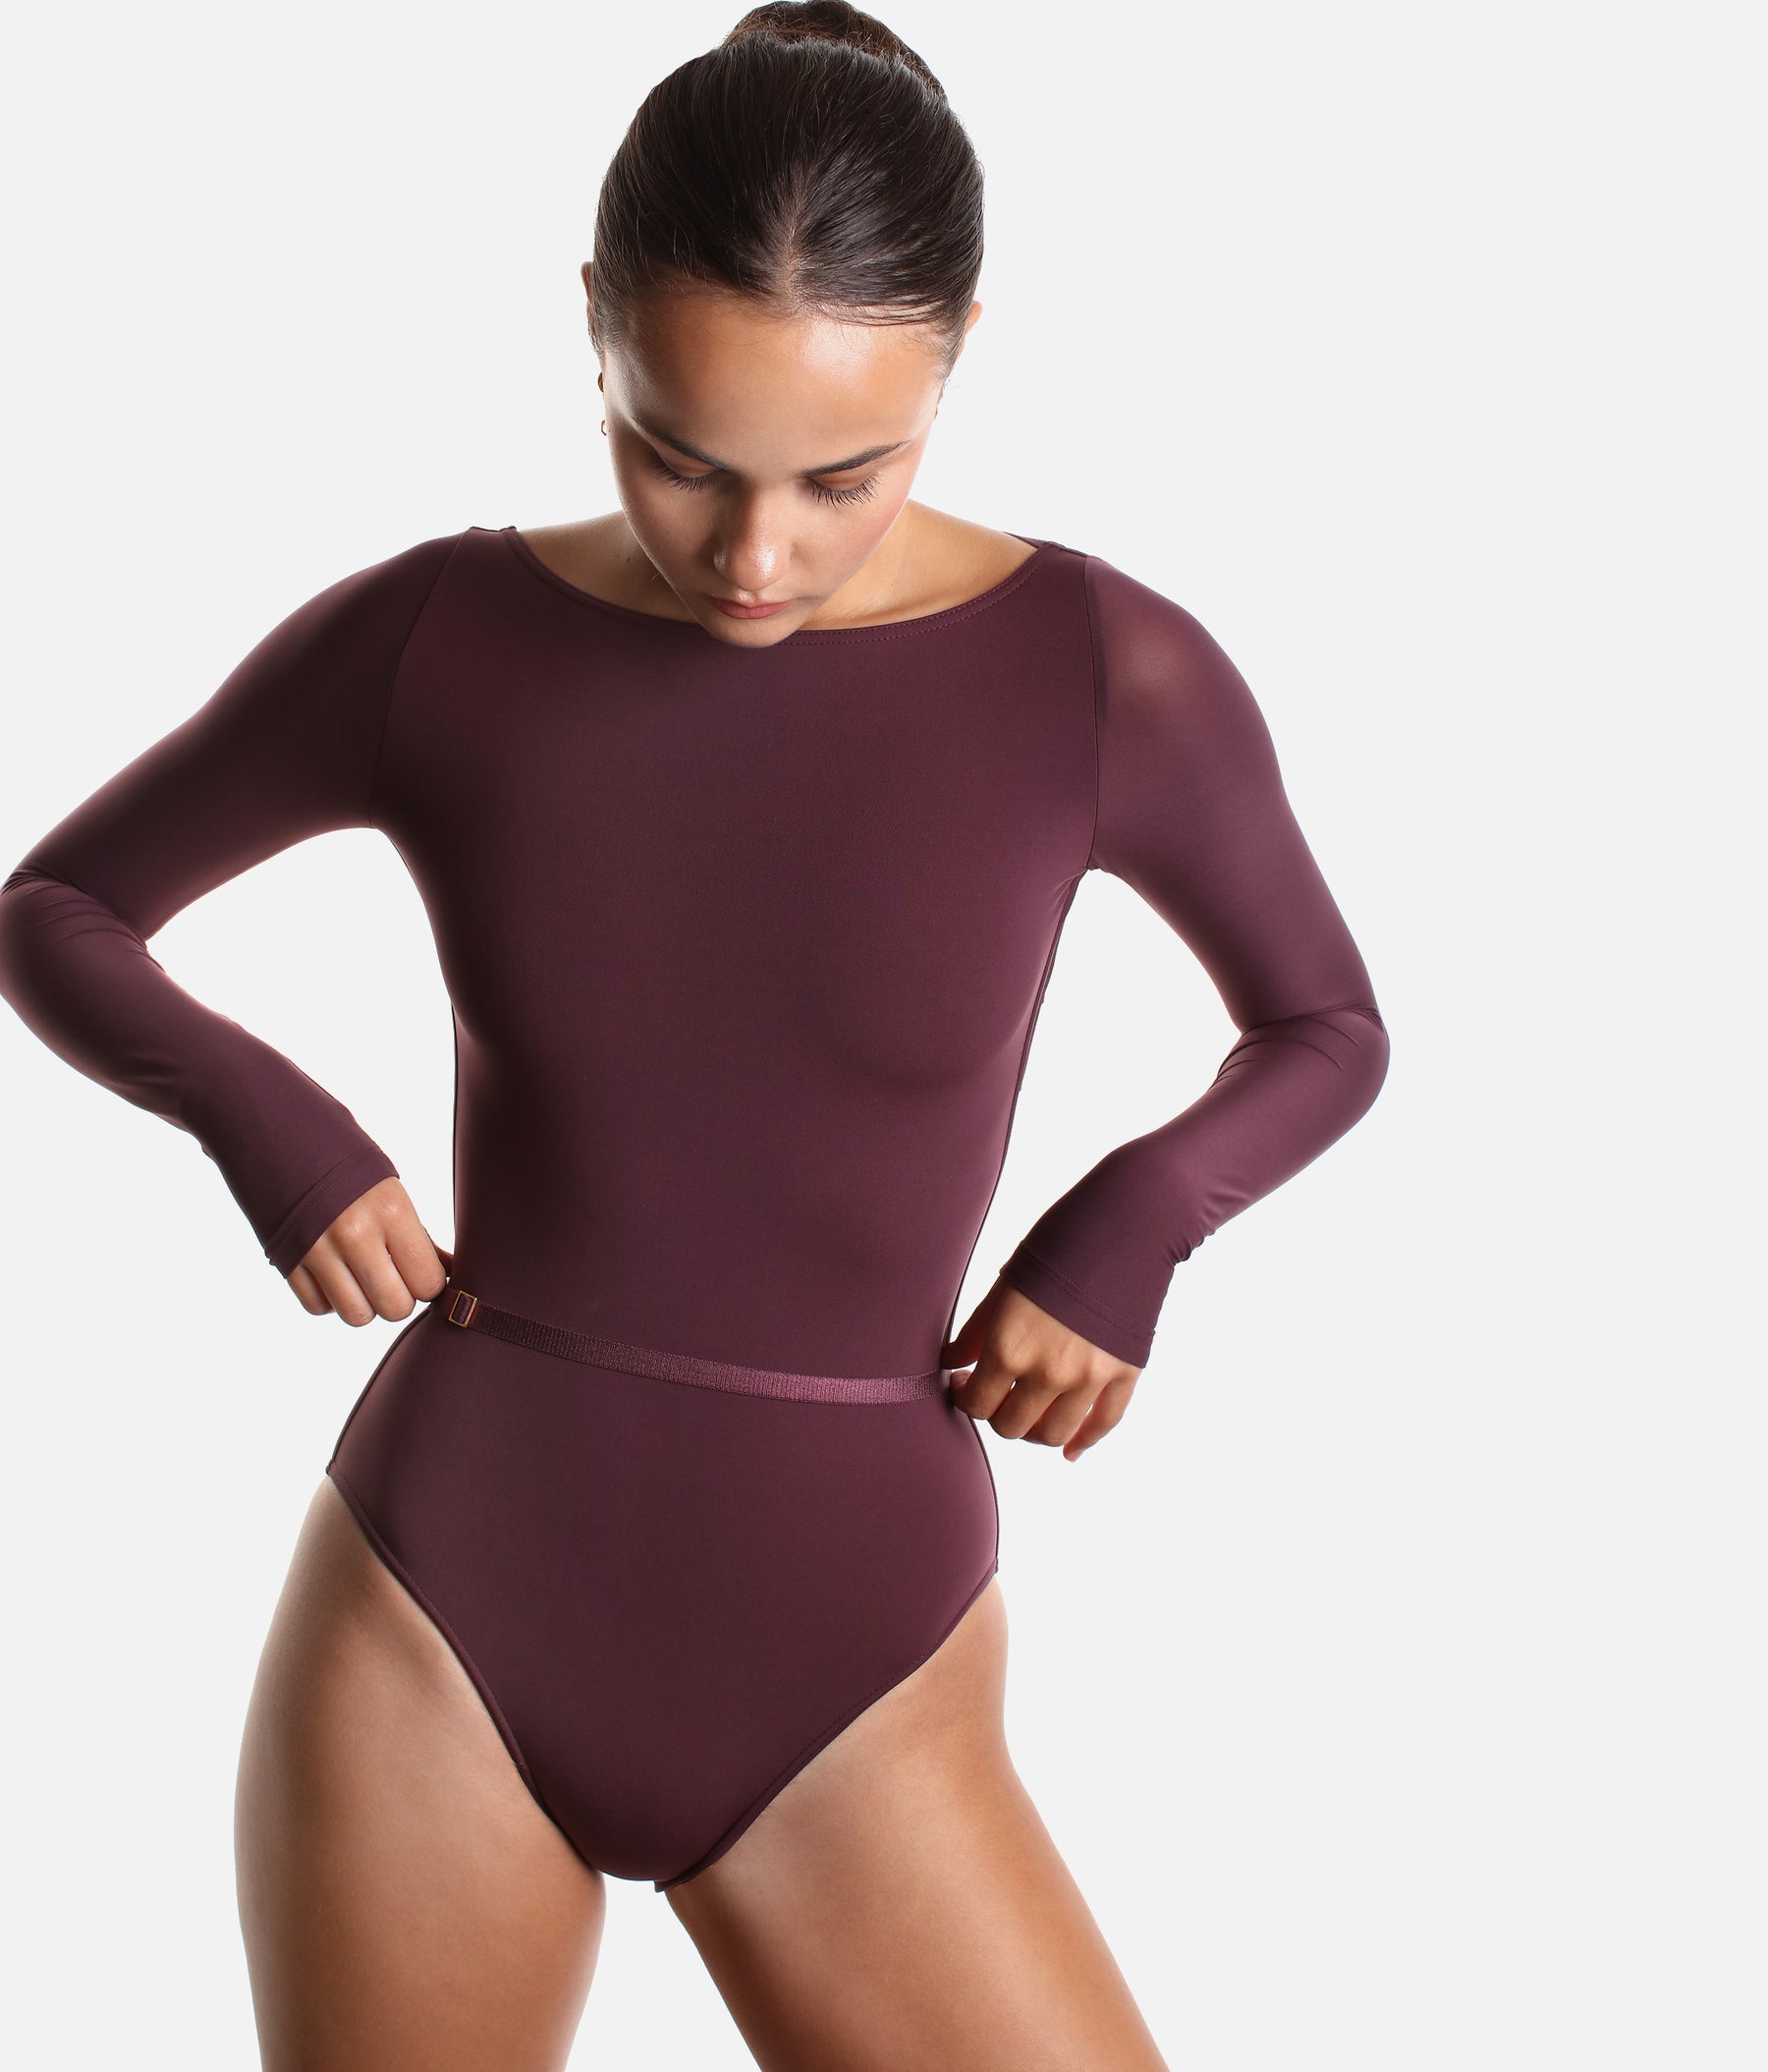 Long Sleeved/Laced Back Leotard - CHEVRON